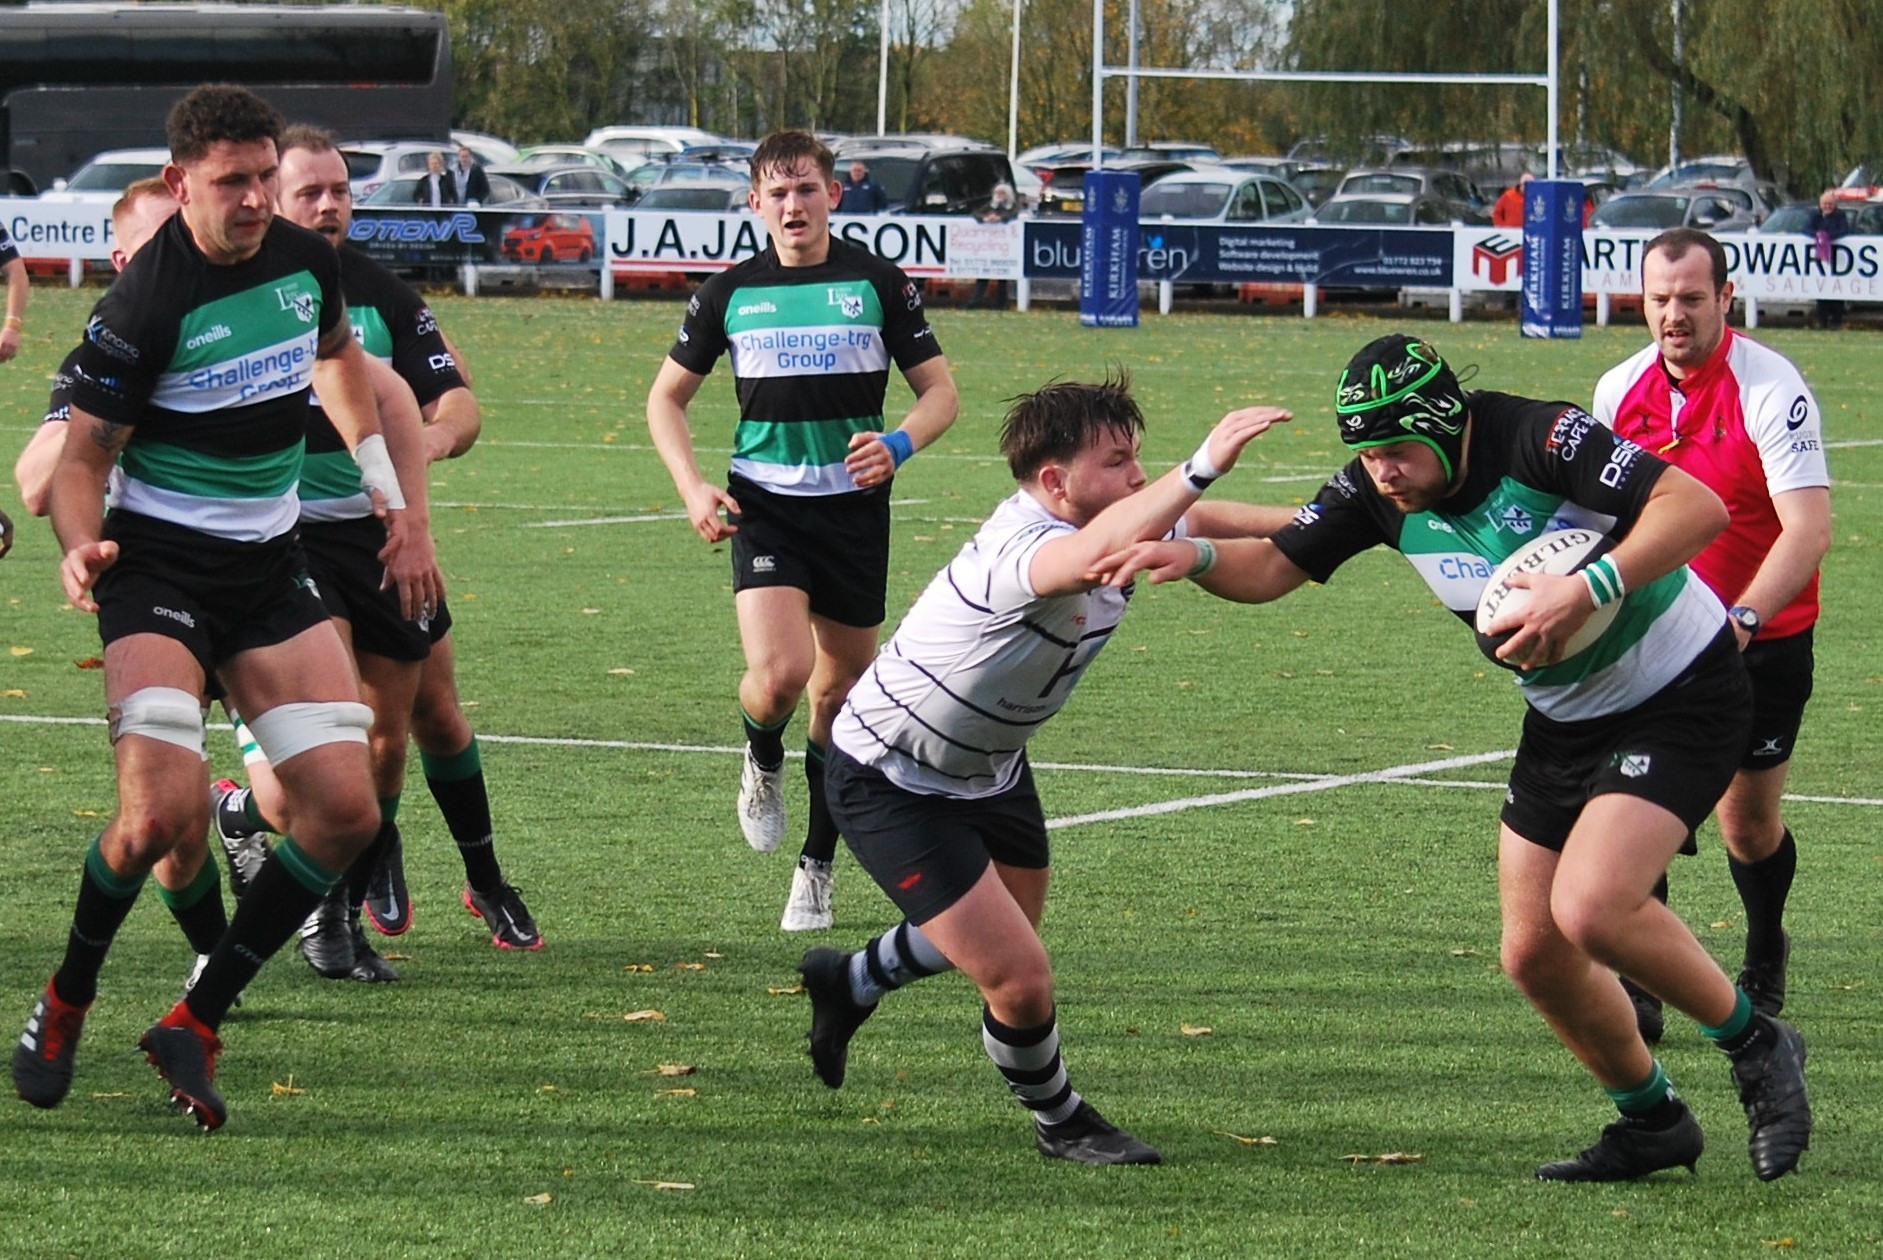 Action from Lymms 66-14 defeat at Preston Grasshoppers on Saturday. Pictures by Stewart Watson